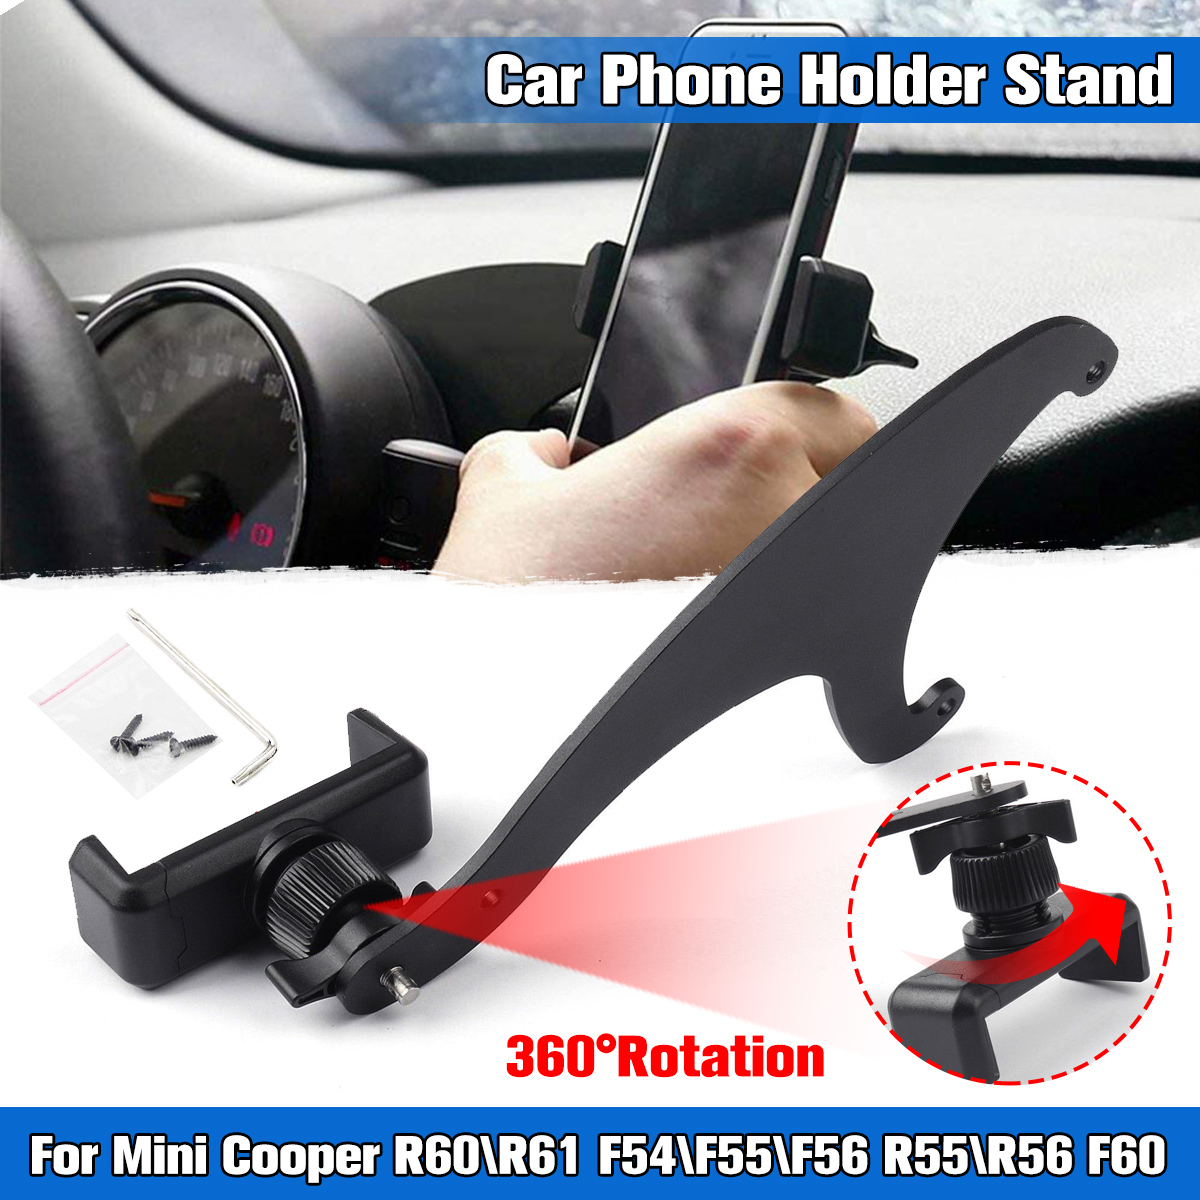 Bakeey-360deg-Rotation-Car-Phone-Mount-Cradle-Holder-Stand-for-Mini-Cooper-R60R61-R55R56-F60-1637156-1